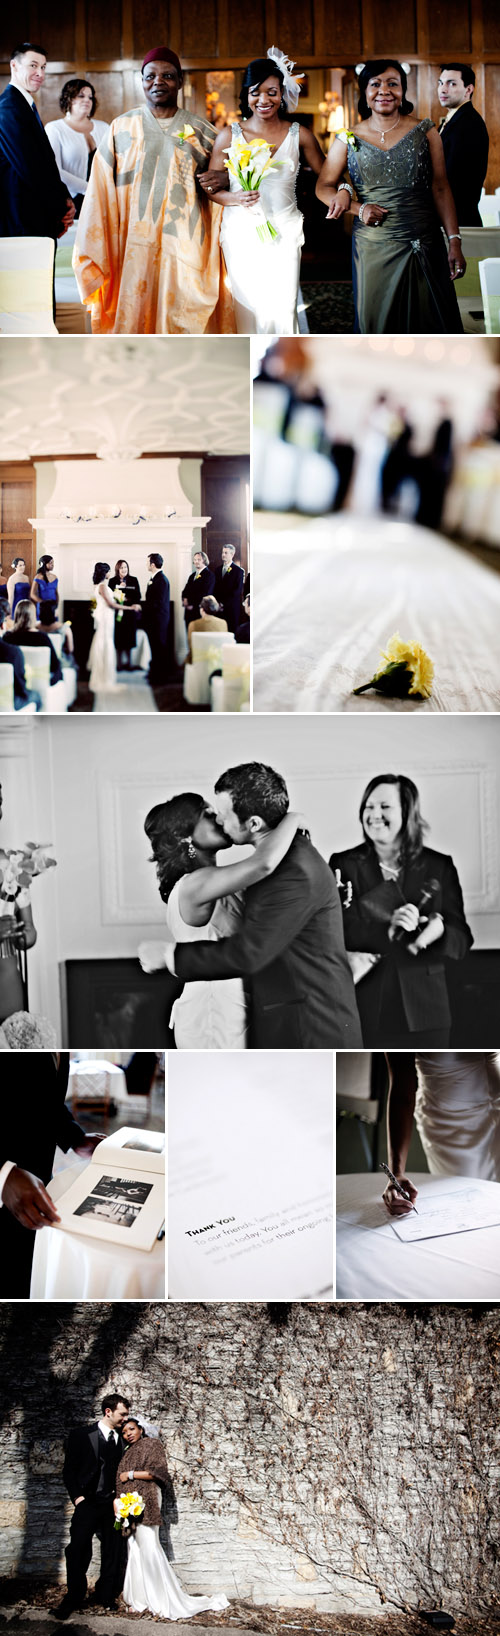 St Paul, Minnesota spring real wedding ceremony, yellow and blue color palette, images by Eliesa Johnson of Photogen